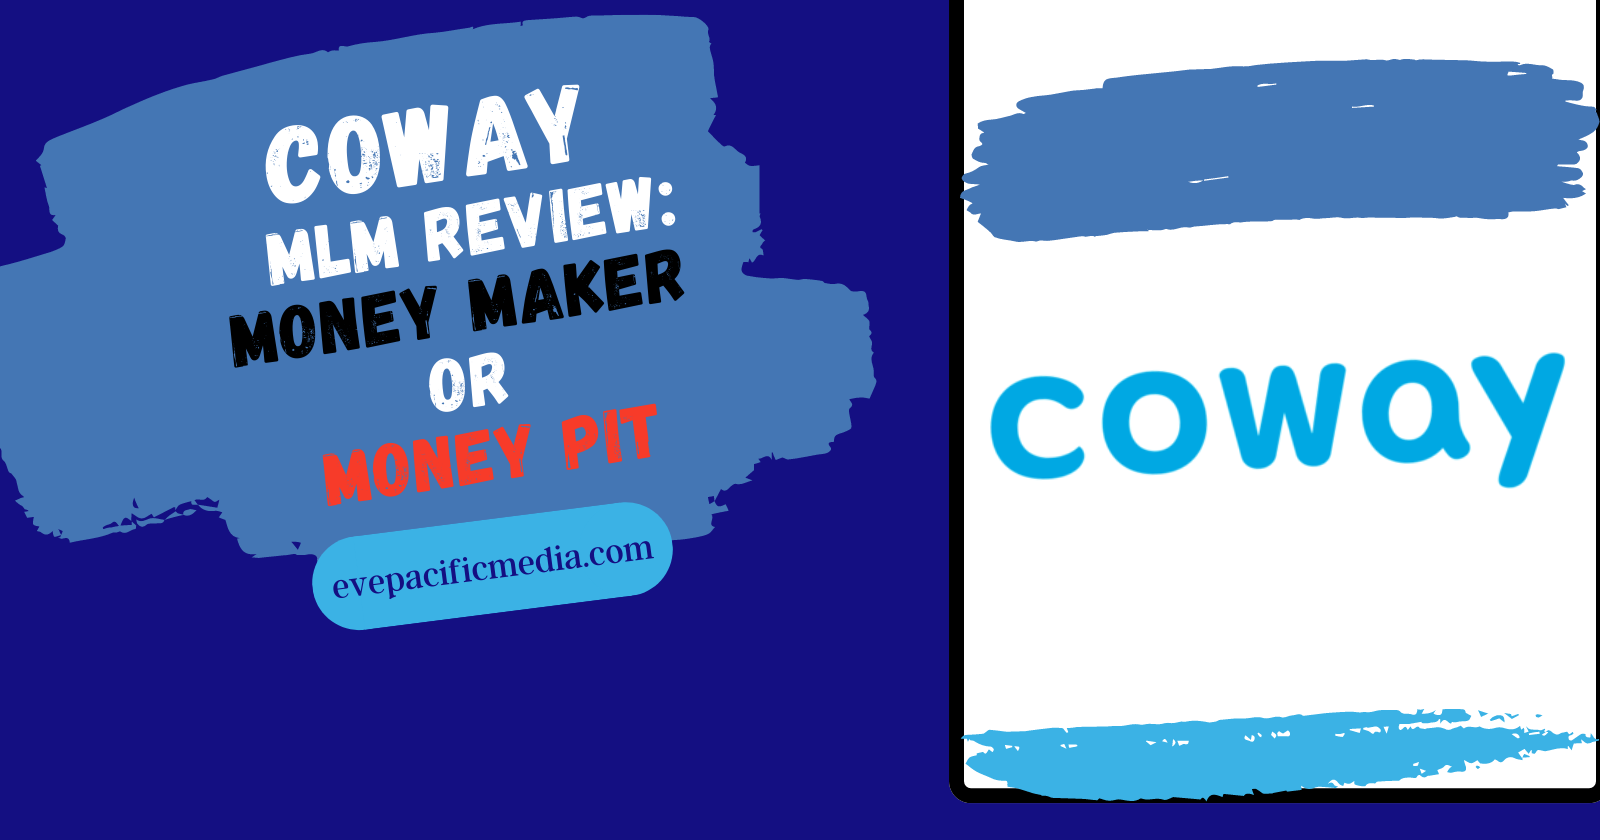 Coway MLM review: Money Maker or Money Pit?